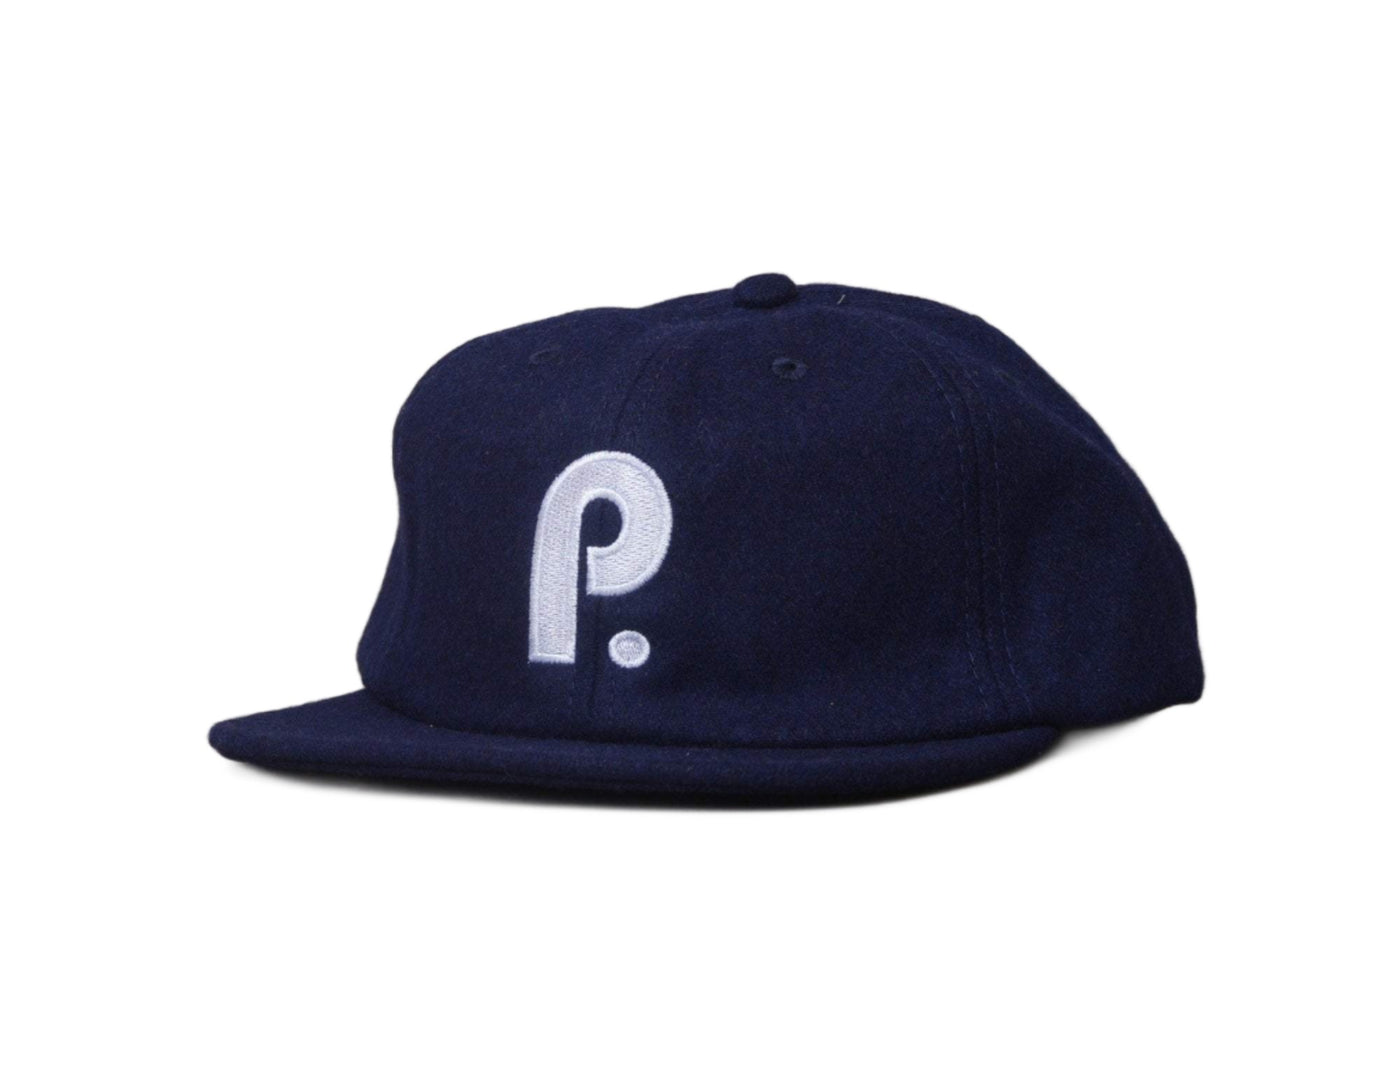 Cap Adjustable Paterson Brushed Wool Club Hat, Navy Paterson League Adjustable Cap Cap / Blue / One Size